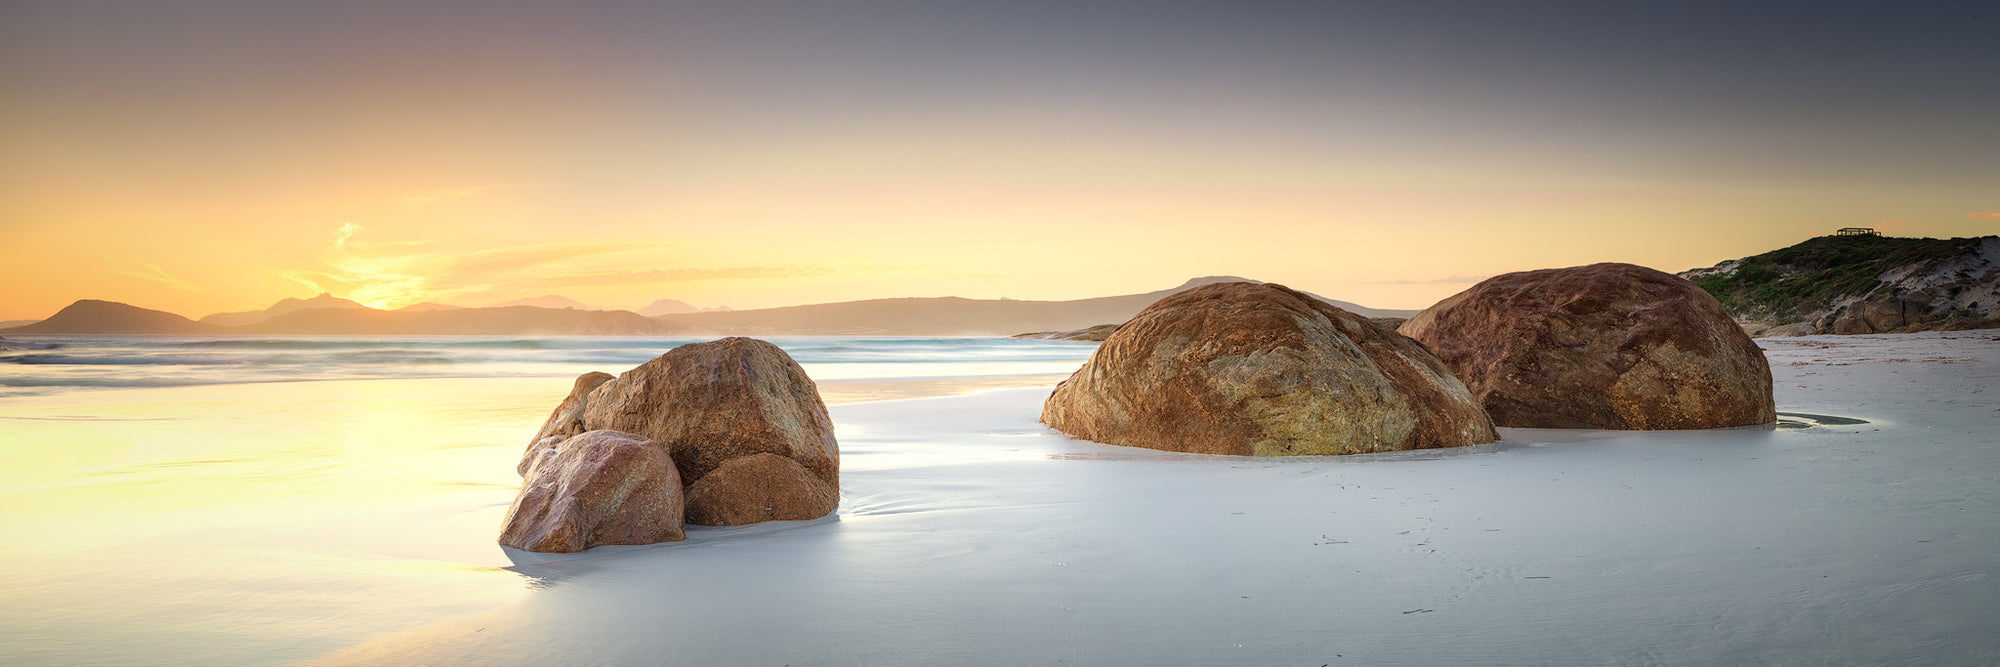 Sunset at Lucky Bay Esperance with three rocks in the foreground